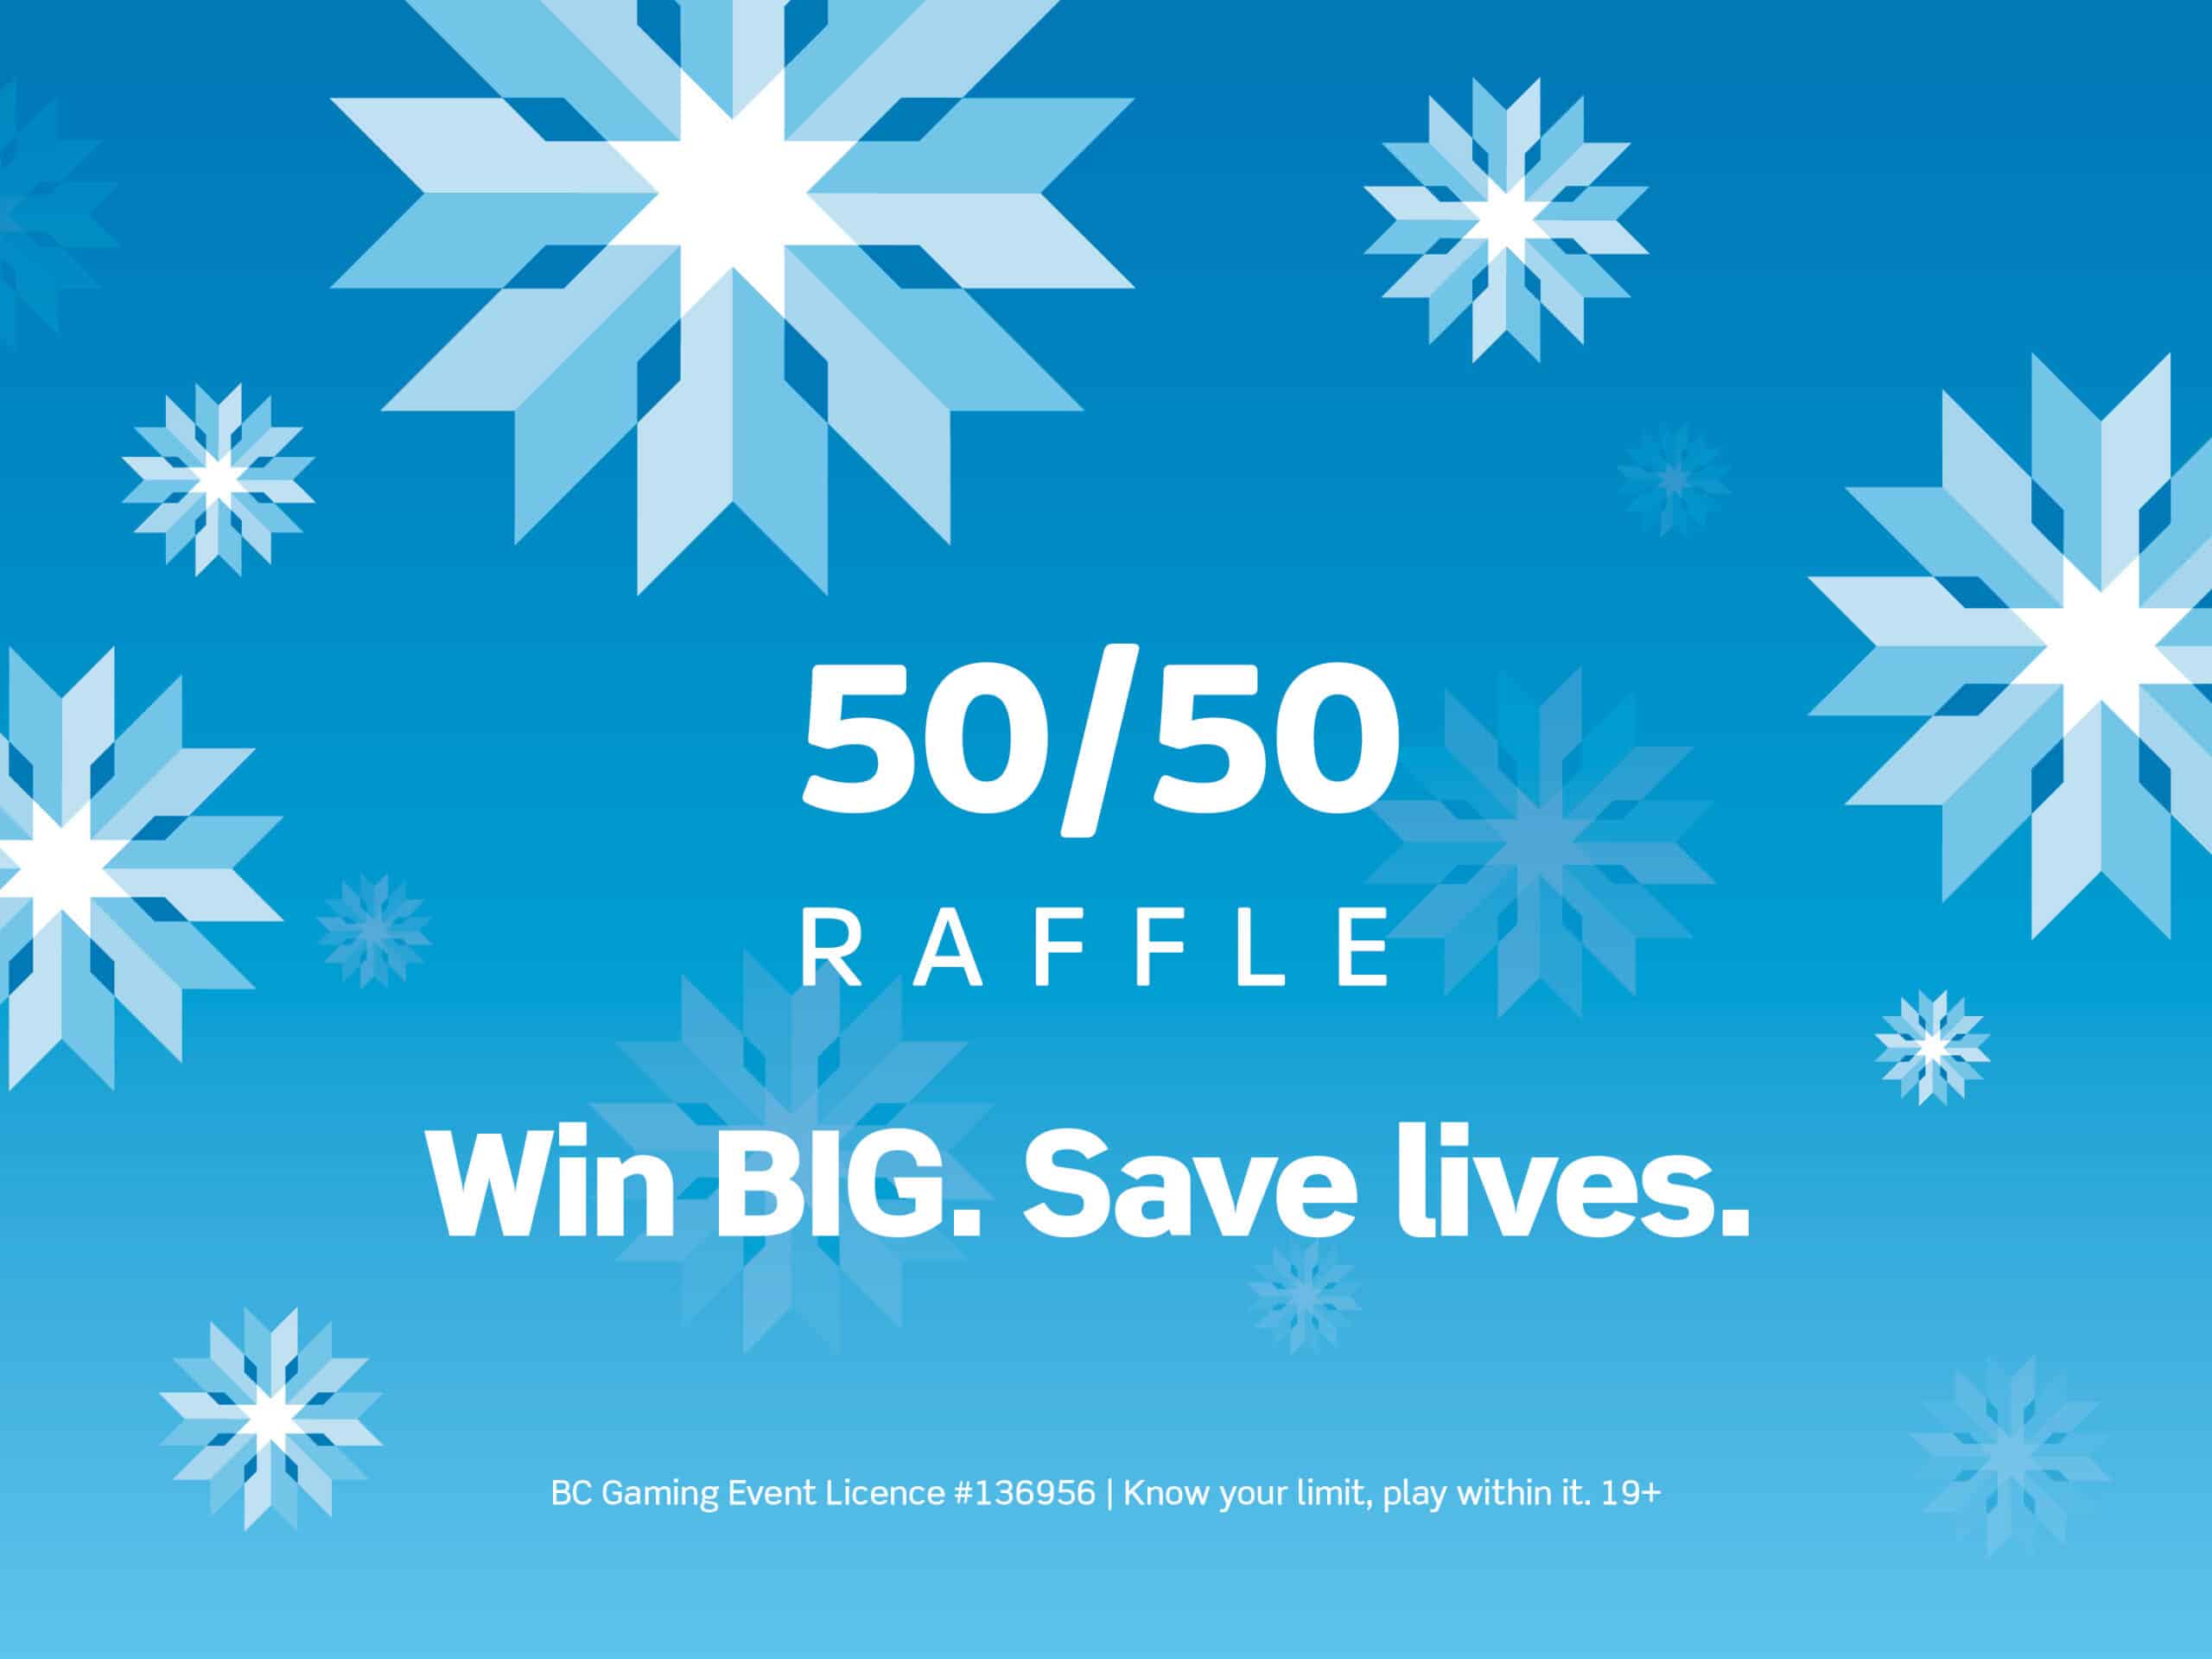 Illustration with a blue background and white snowflakes with text reading "50/50 Raffle. Win Big. Save Lives"